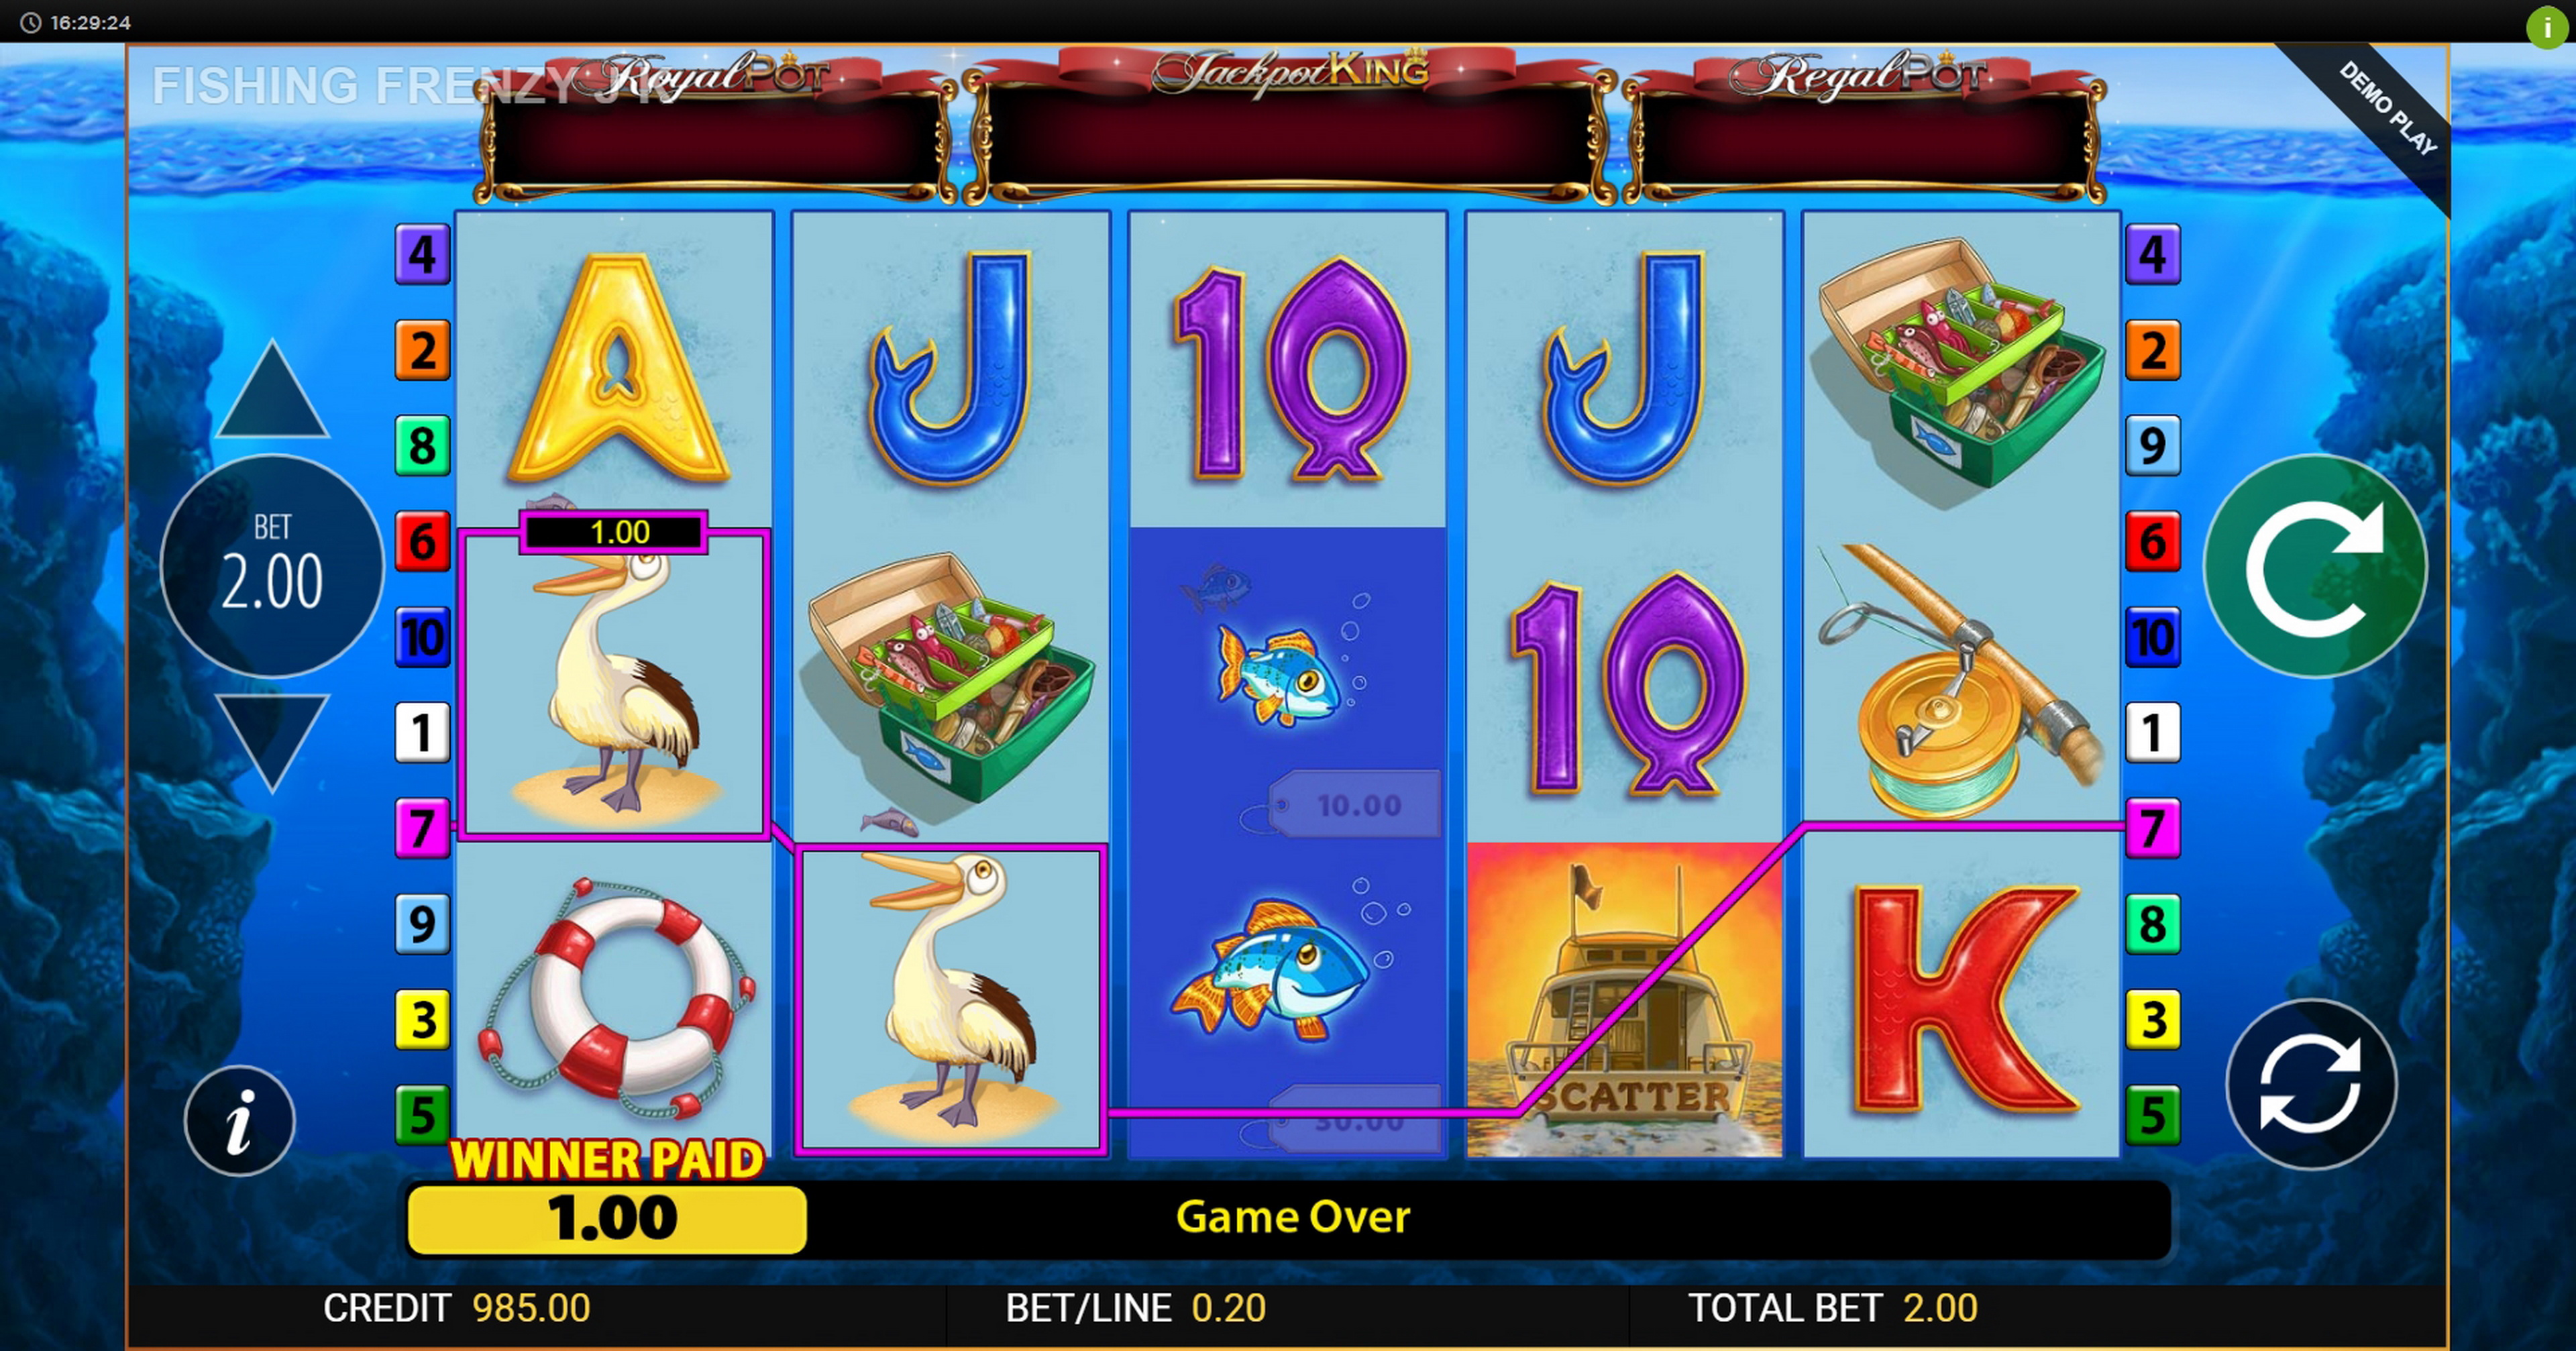 Win Money in Fishin Frenzy Jackpot King Free Slot Game by Blueprint Gaming